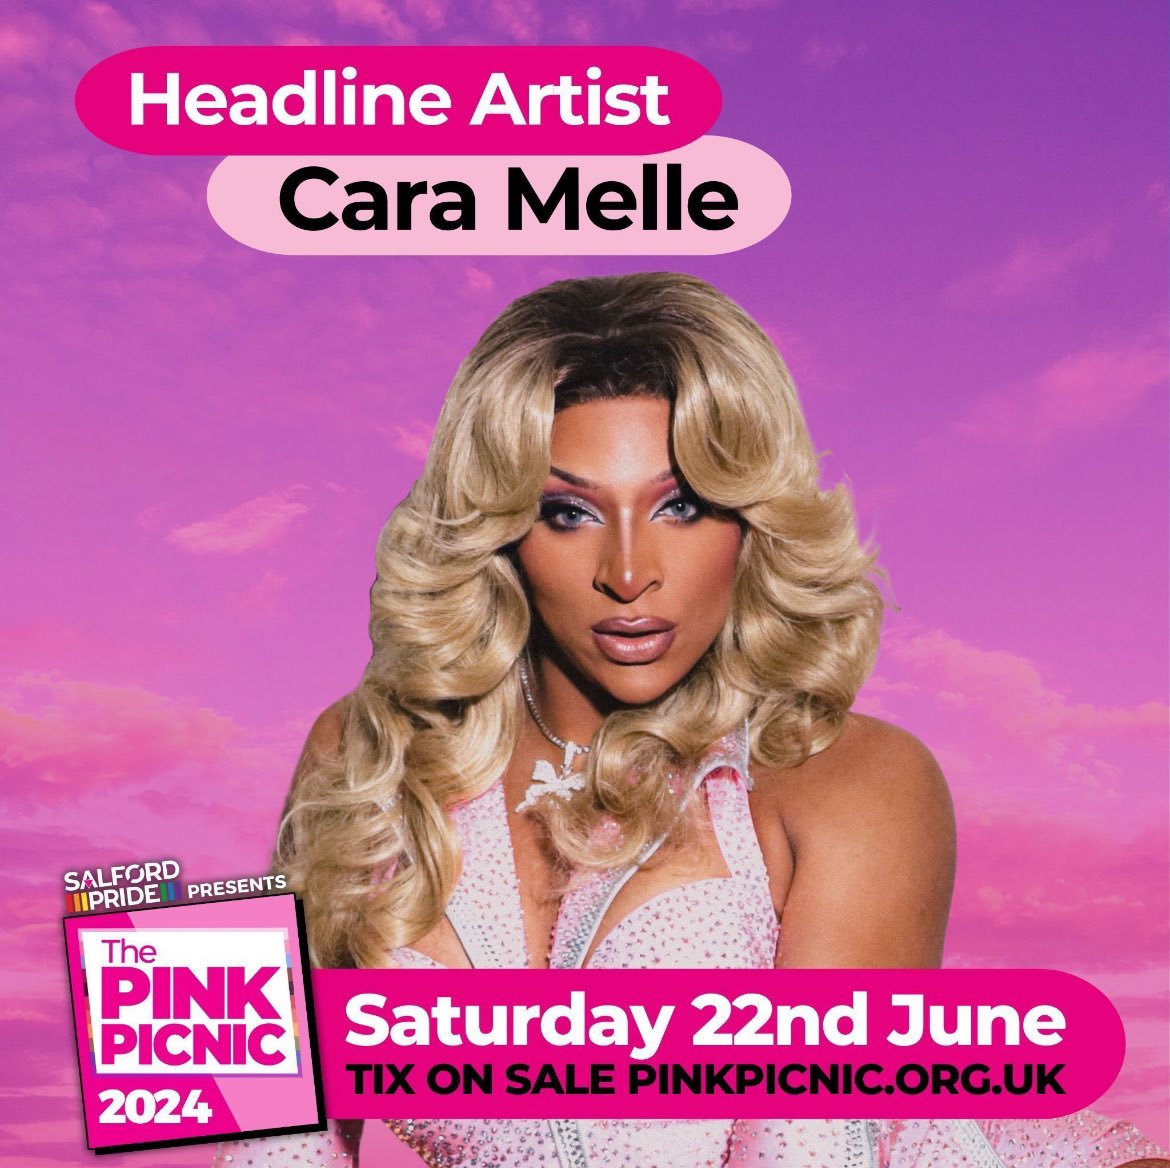 🔥ARTIST ANNOUNCEMENT🔥

Not only will the star of #RPDRUK S5 be taking to our main stage, @TheCaraMelle will also be doing an exclusive MEET & GREET in the PinkPLUS VIP area. 

Use code – CARAMELLE – to get PinkPLUS tickets for £35 each. 

>>> buff.ly/2ThGO6A